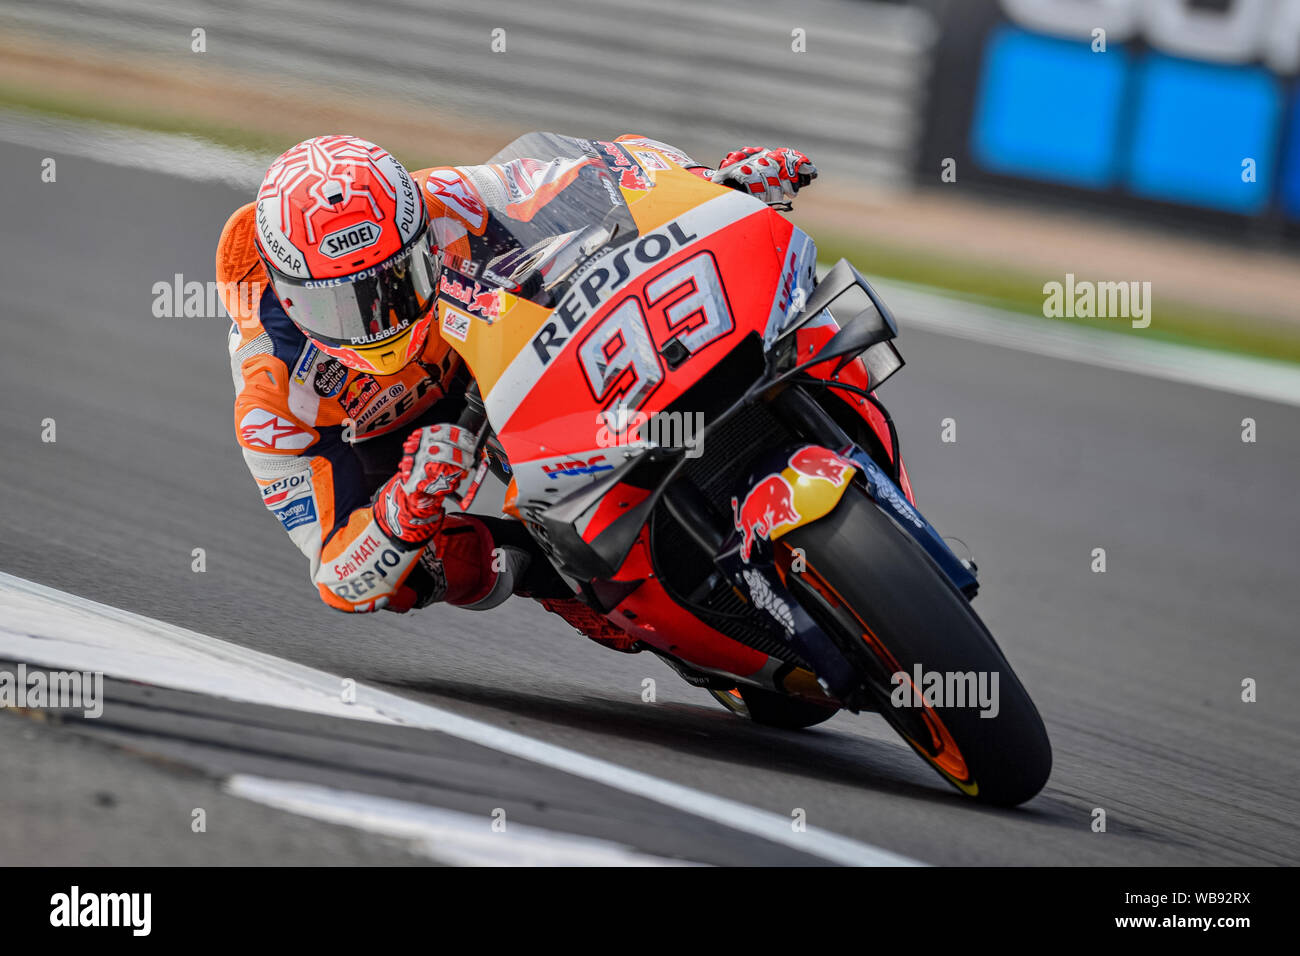 Towcester, UK. 25th Aug, 2019.  25th Aug, 2019. Marc Marquez (SPA) of Repsol Honda Team during Sunday’s Race of  GoPro British Grand Prix at Silverstone Circuit on Sunday, August 25, 2019 in TOWCESTER, ENGLAND. Credit: Taka G Wu/Alamy Live News Stock Photo